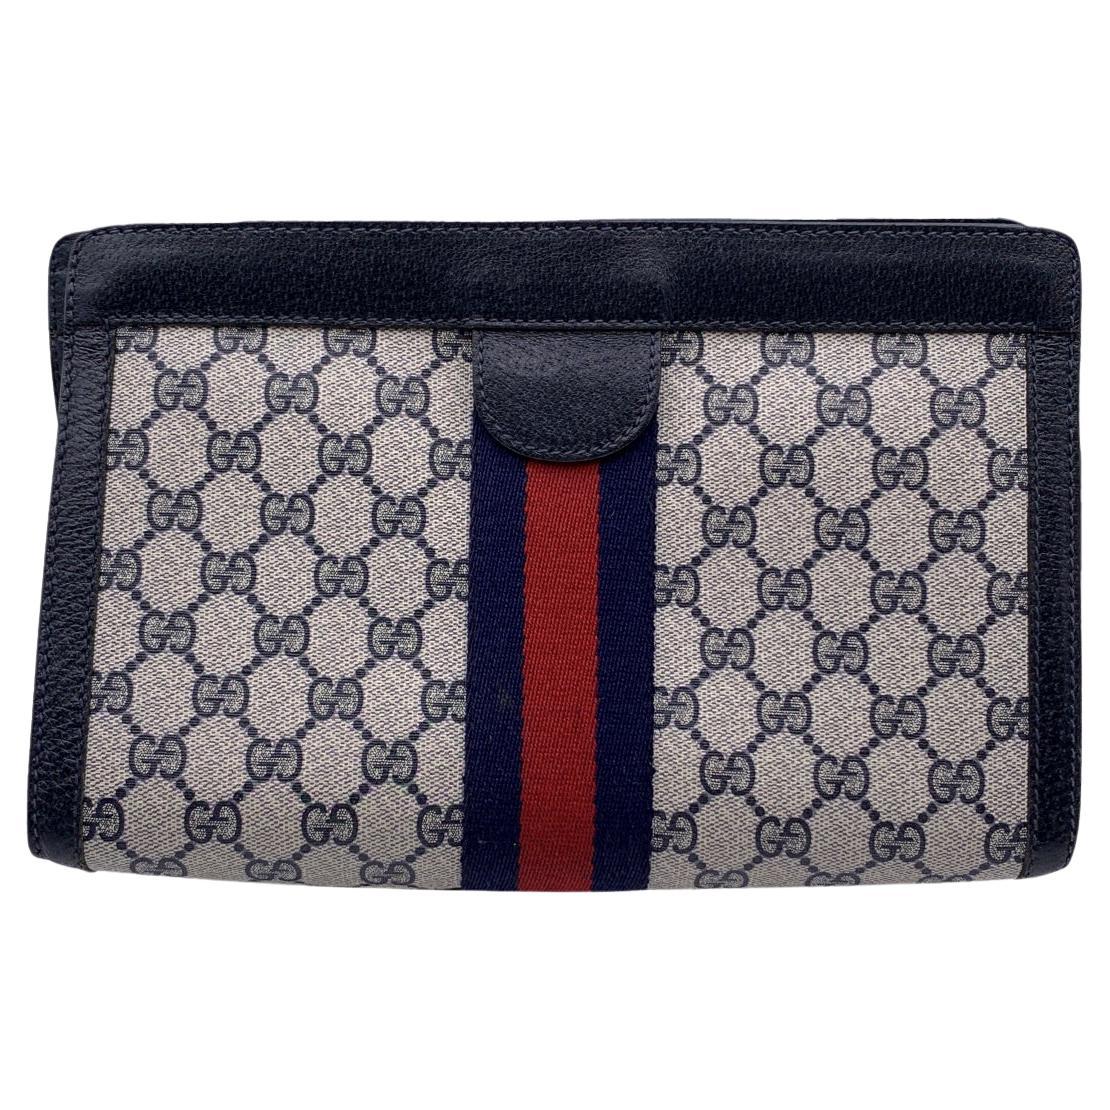 Gucci Vintage Blue Monogram Canvas Cosmetic Bag Clutch with Box